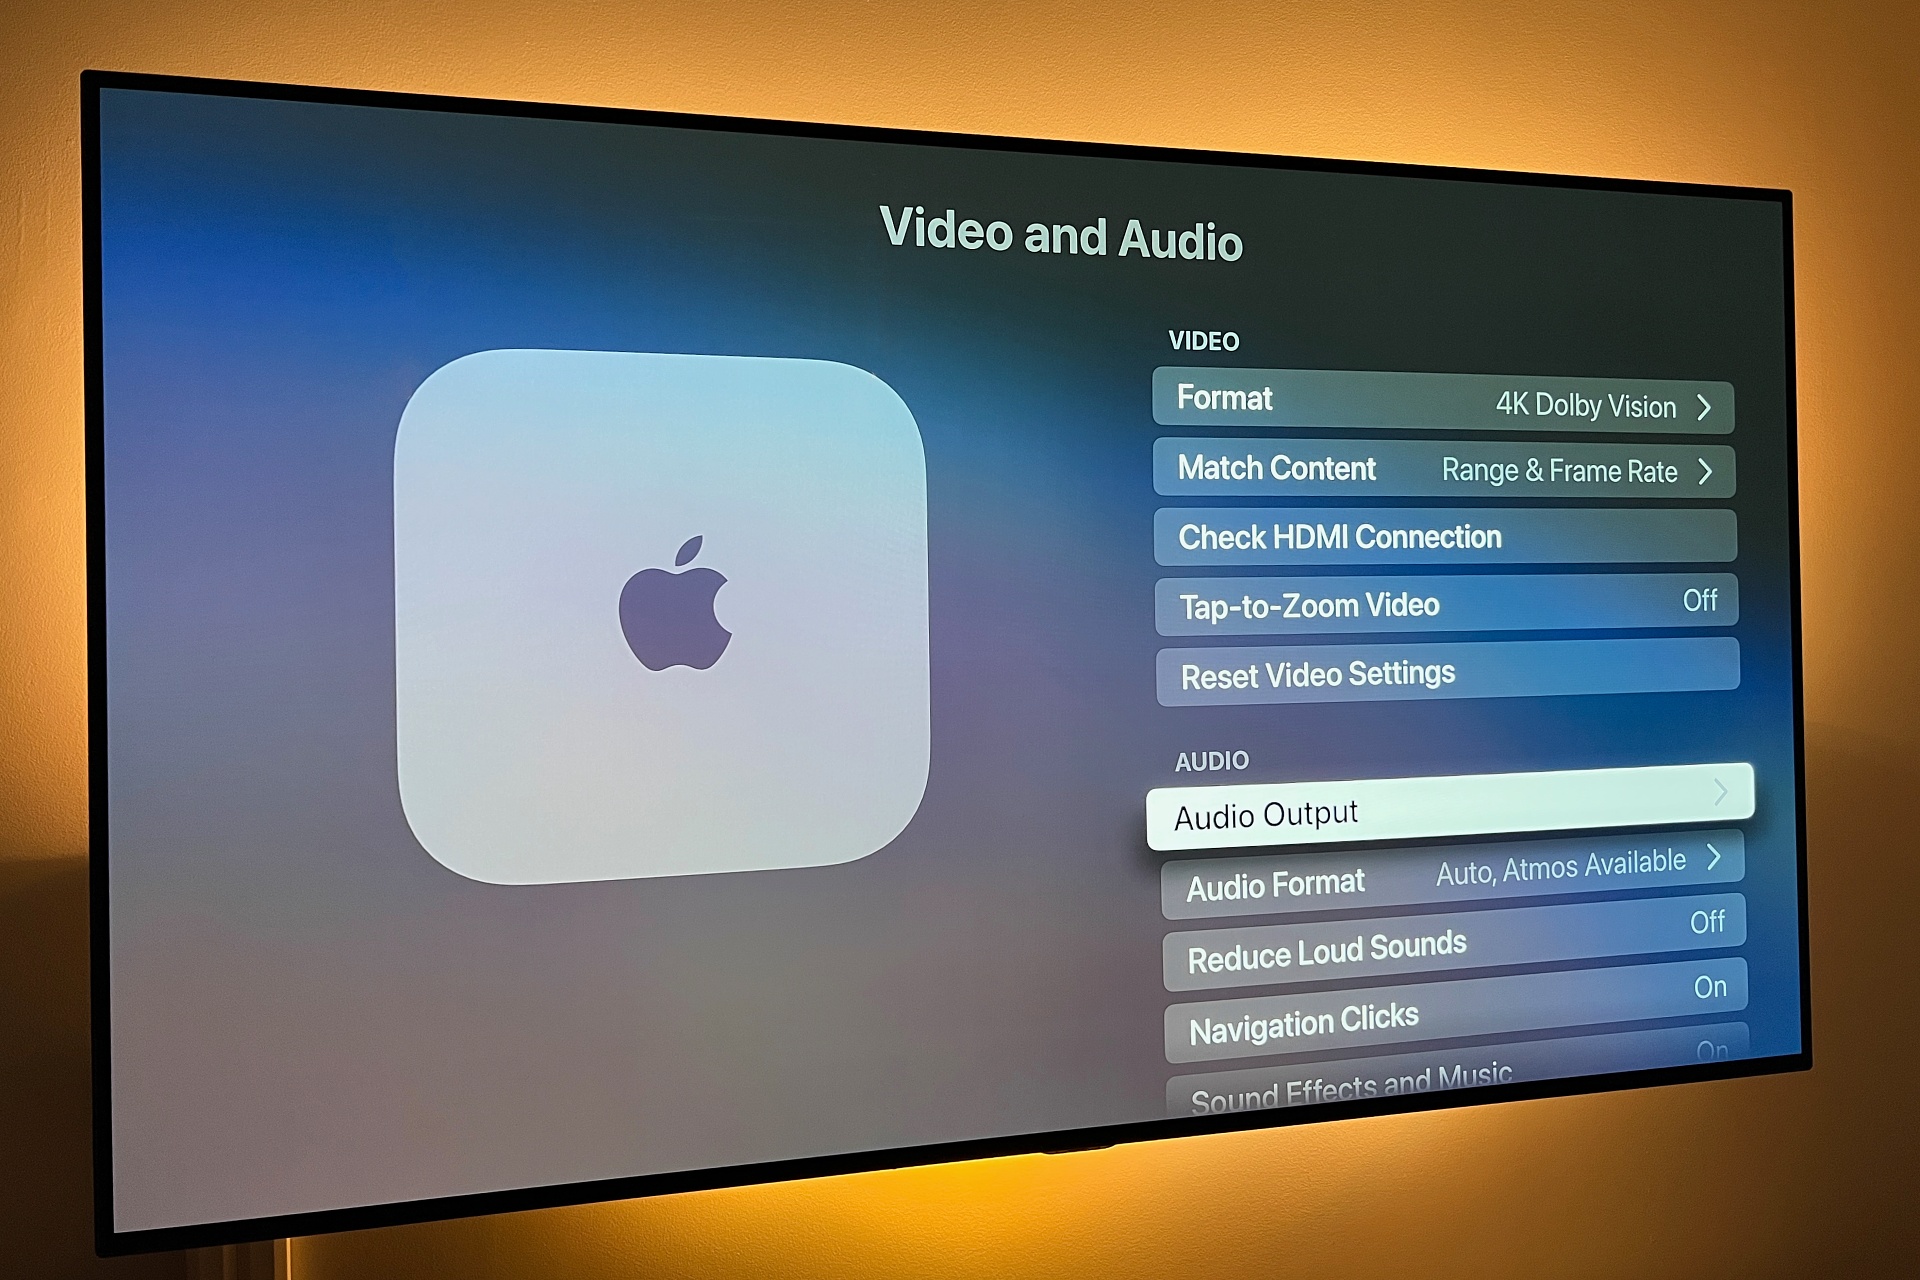 Apple TV not working: Common problems and popular fixes